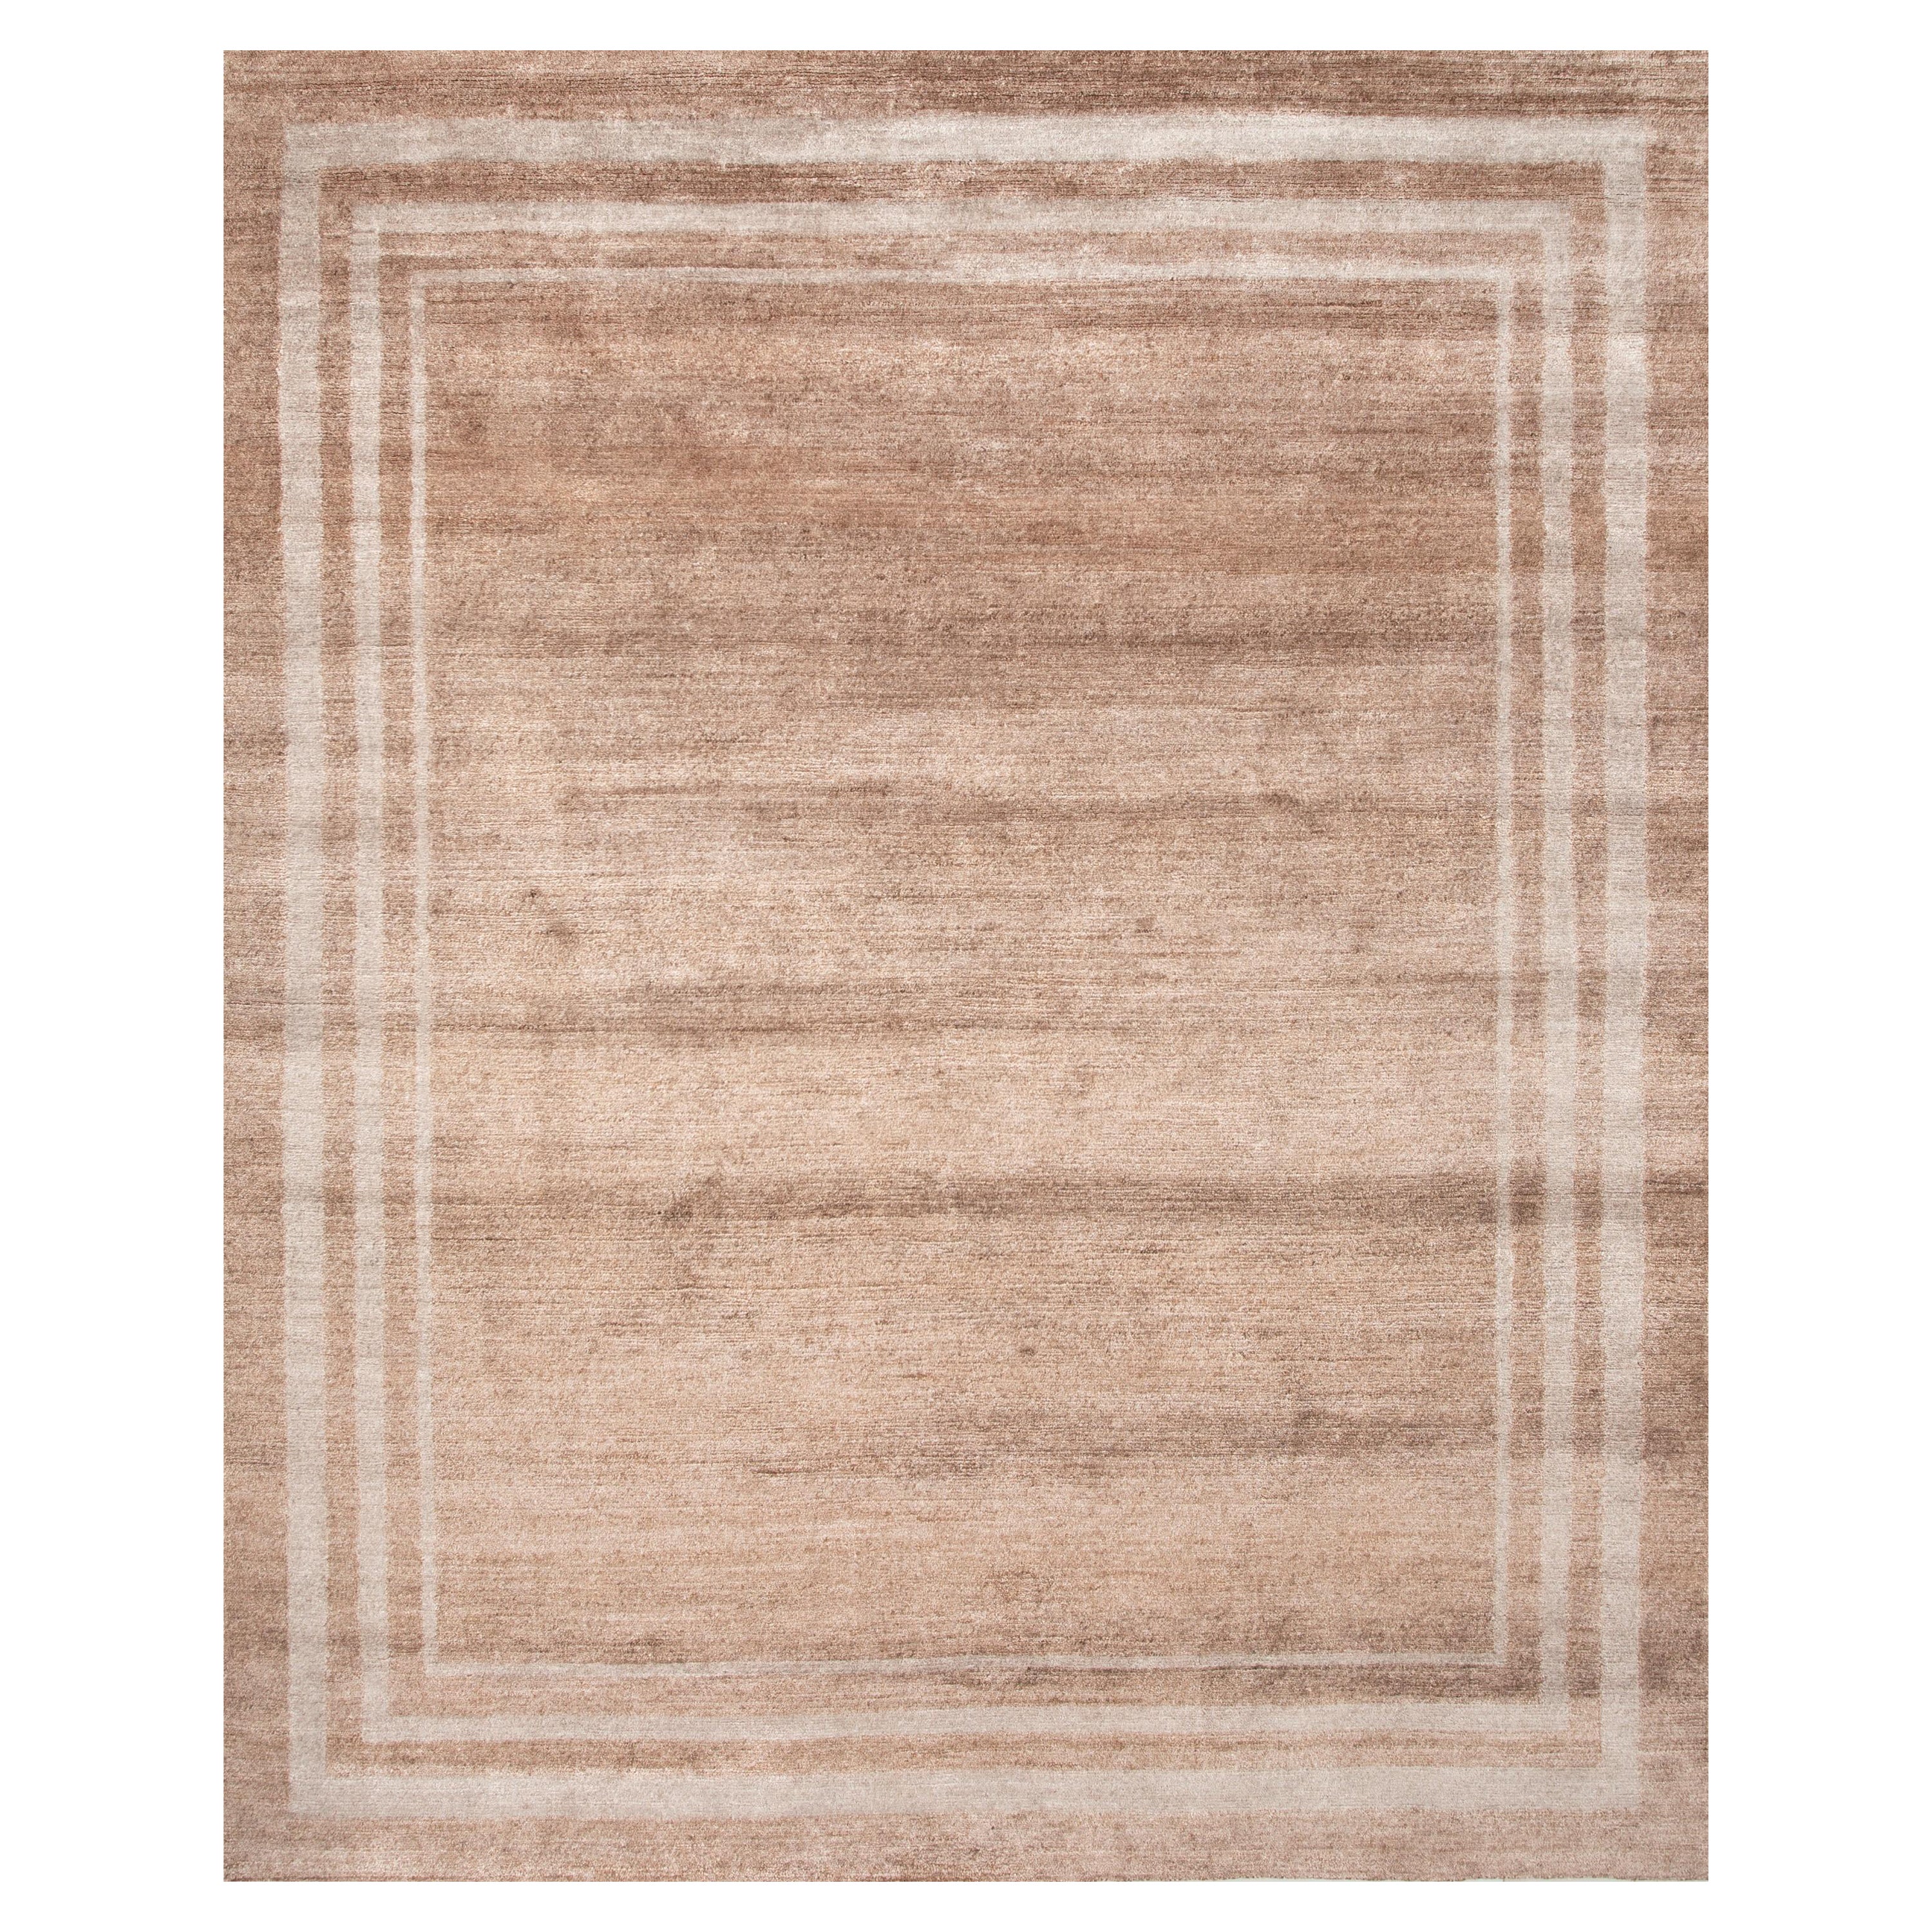 Soft Embrace Tobacco & Pebble 240X300 cm Handknotted Rug